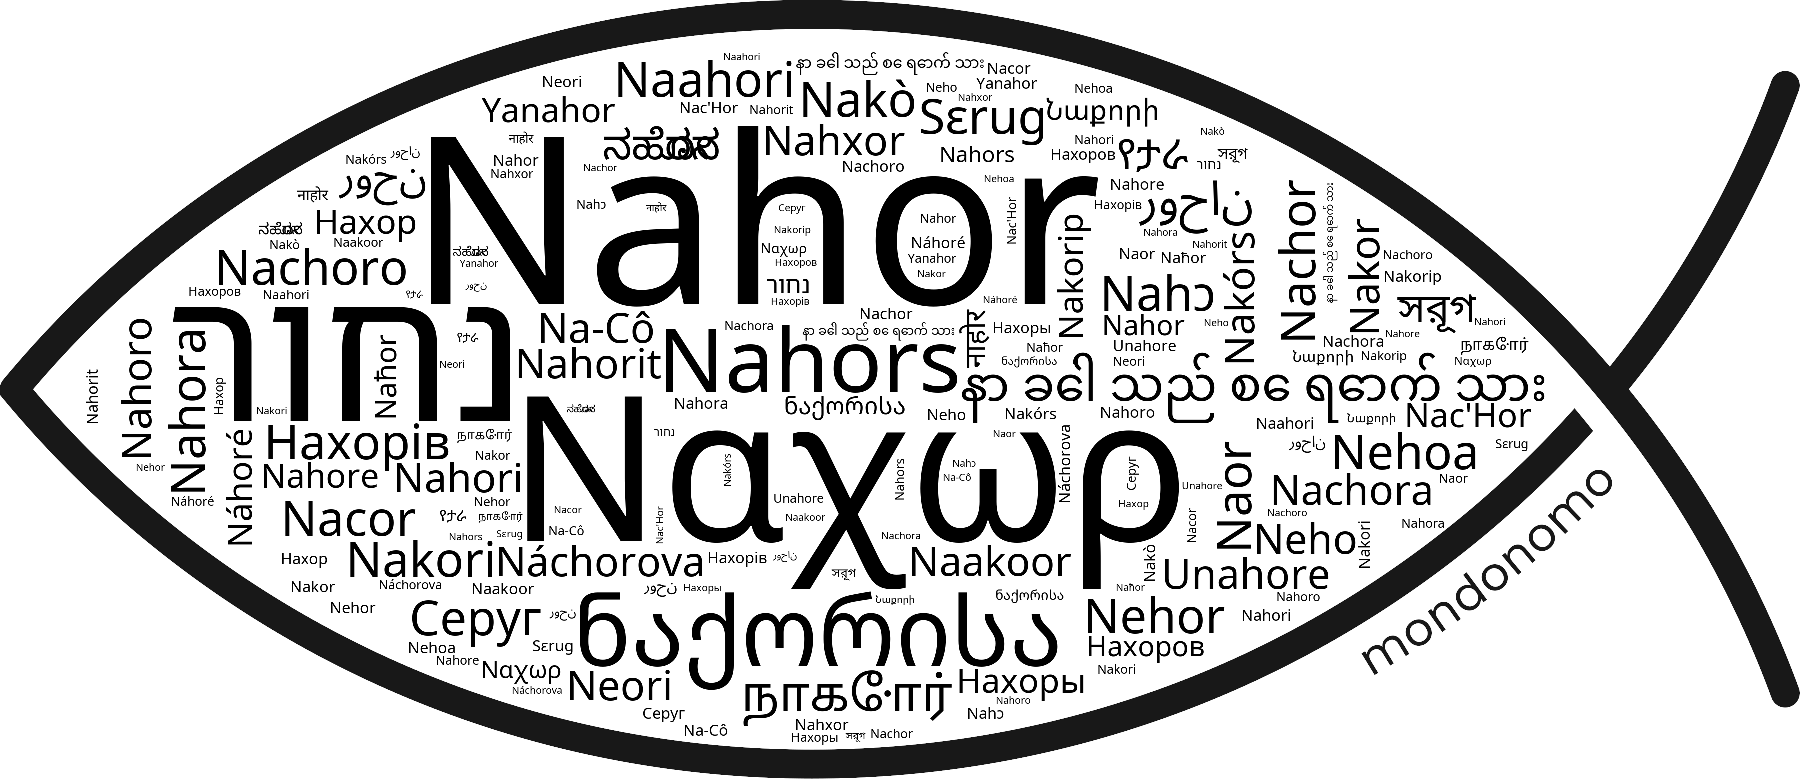 Name Nahor in the world's Bibles